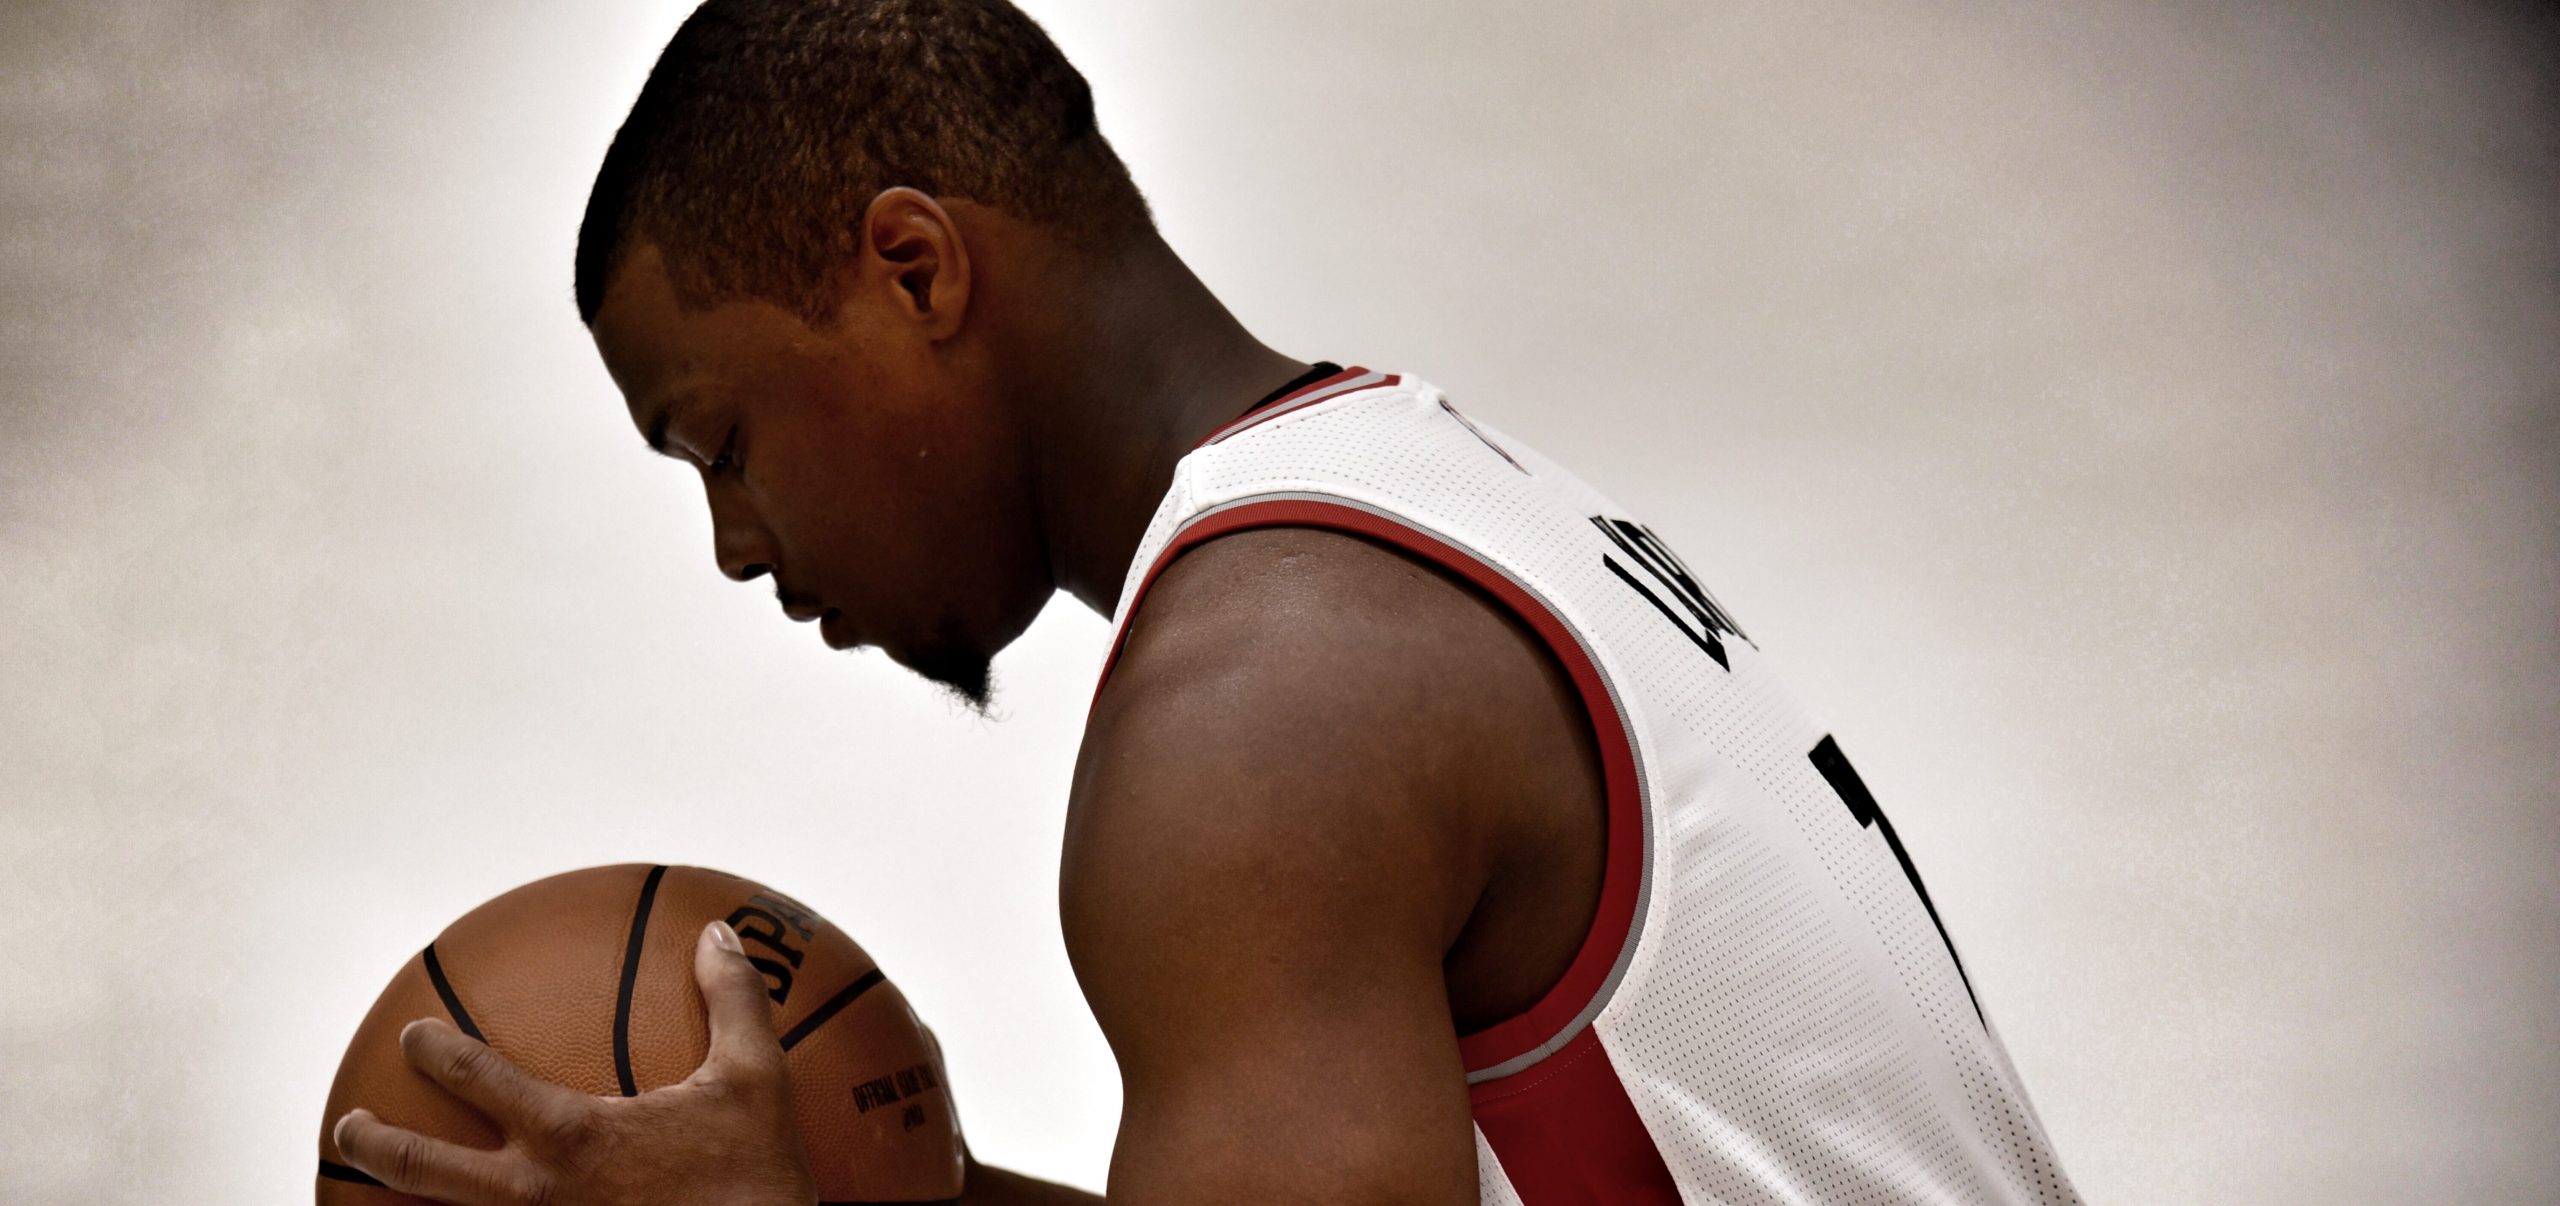 Kyle-Lowry-poses-for-NBA-photographers